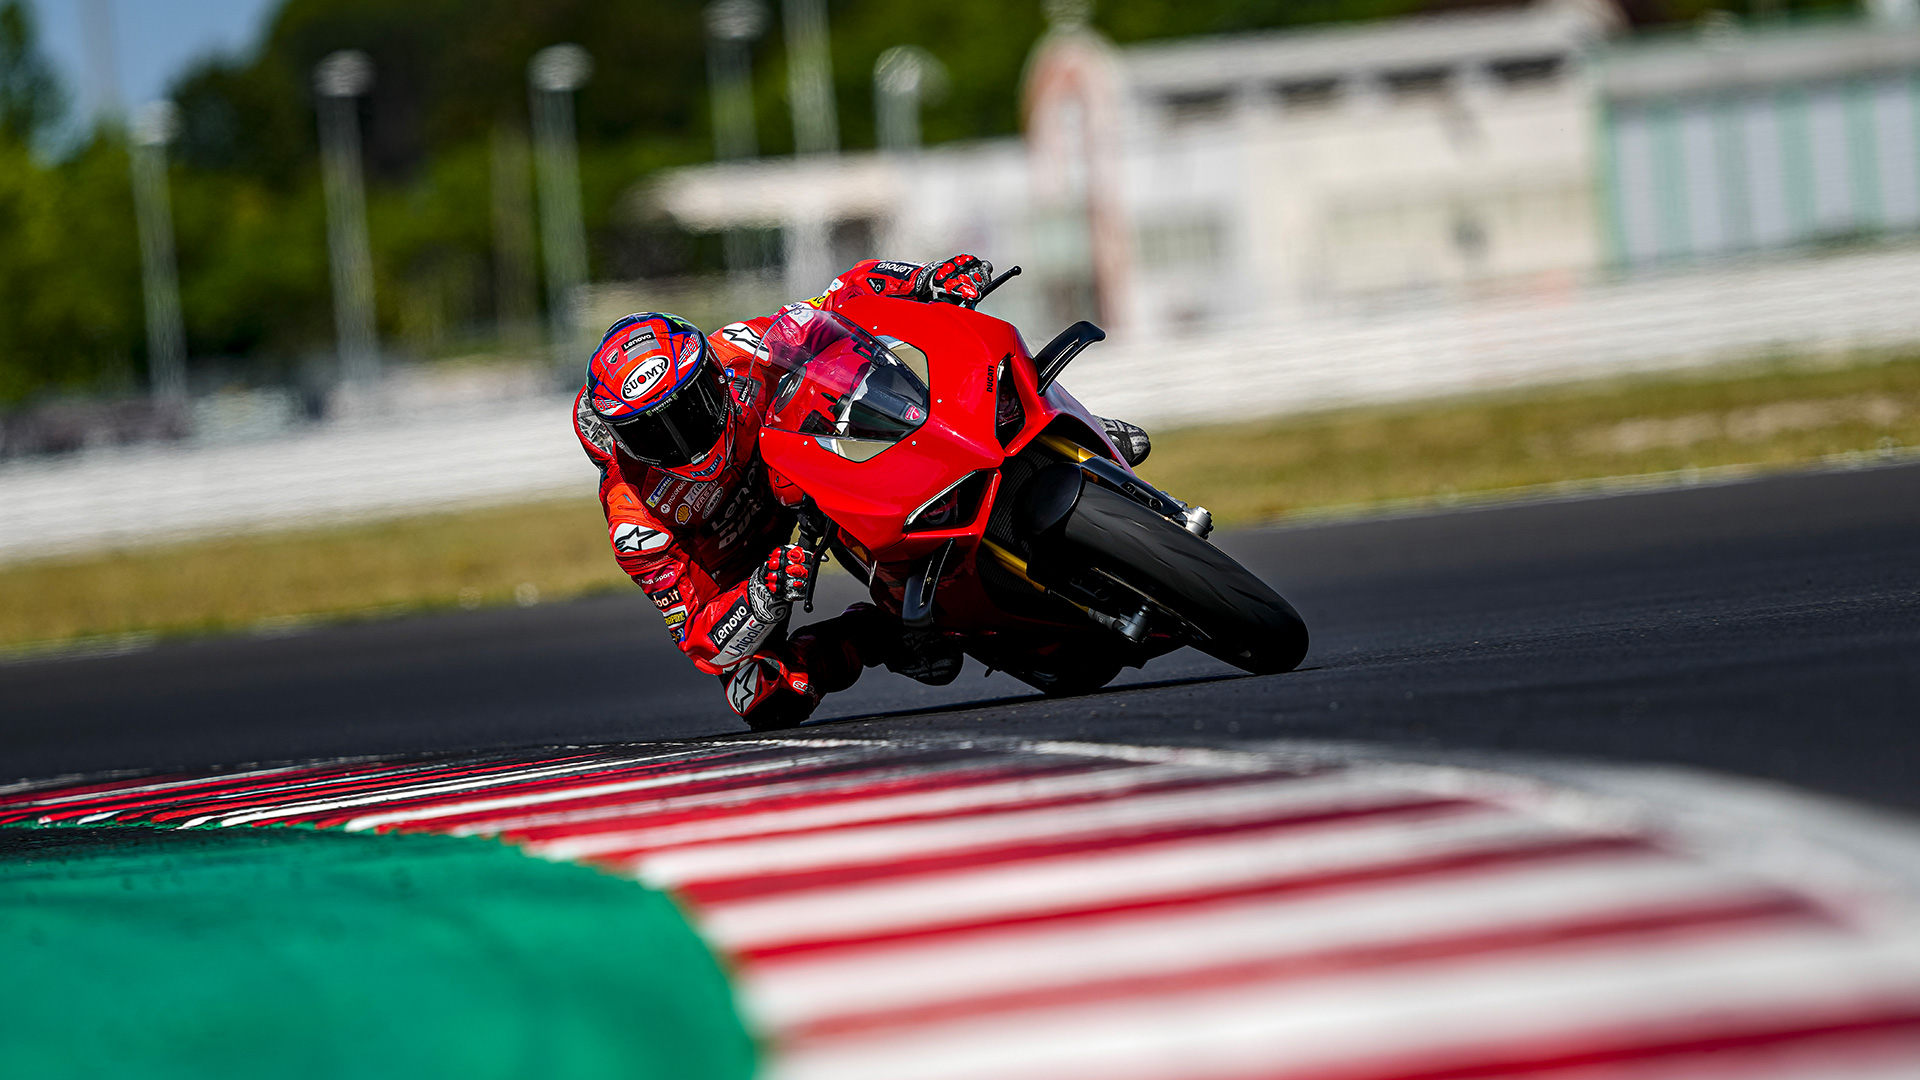 Panigale-MY22-Dinamica-03-Gallery-1920x1080 (1)